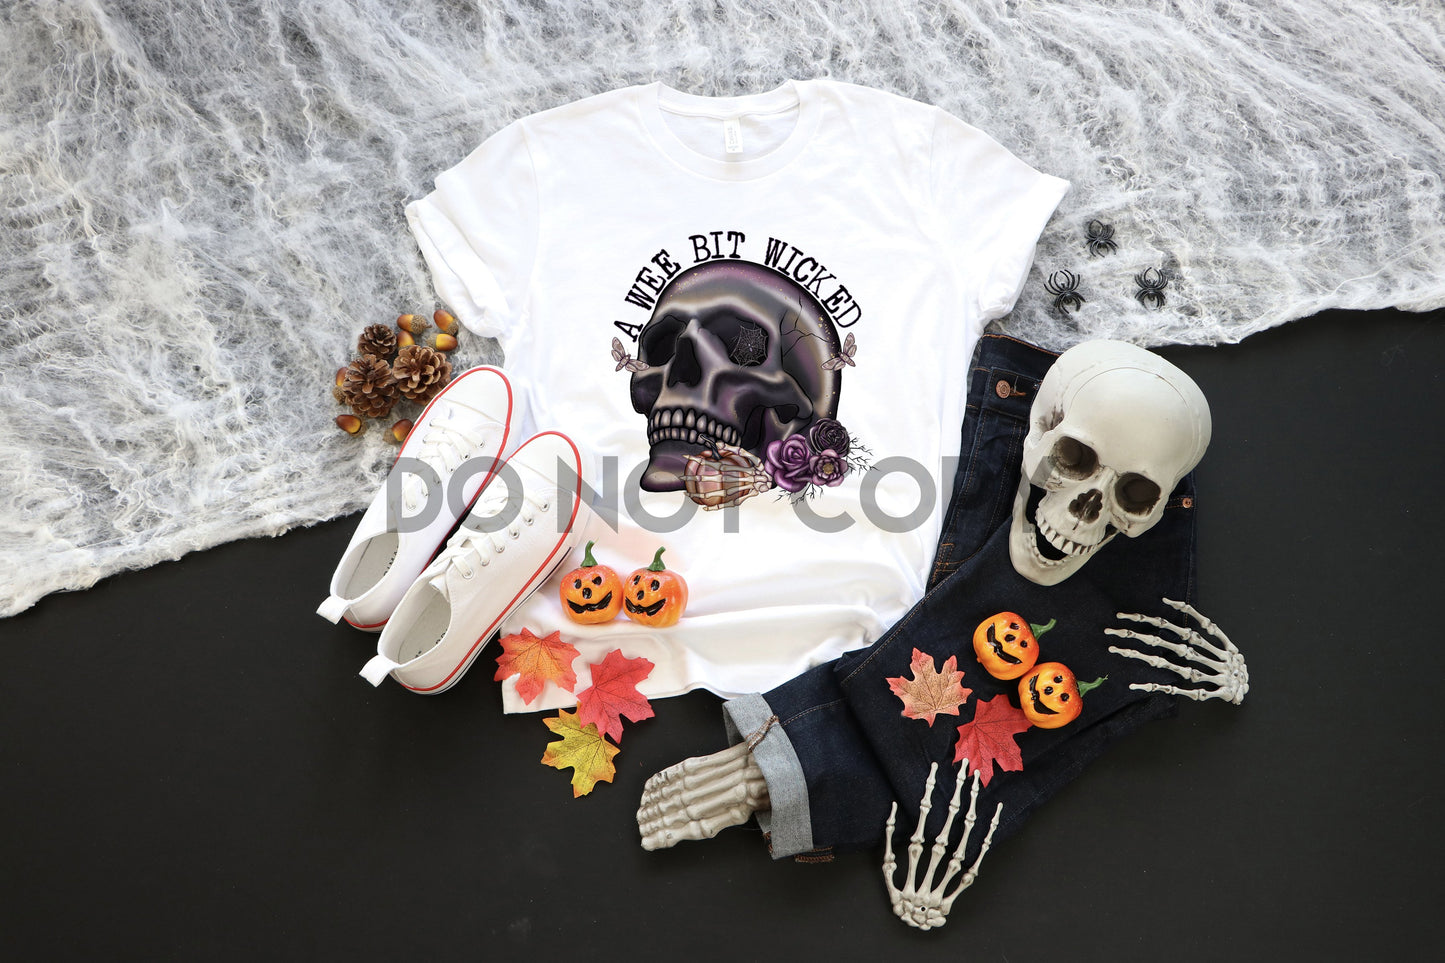 A Wee Bit Wicked Skull Dream Print or Sublimation Print